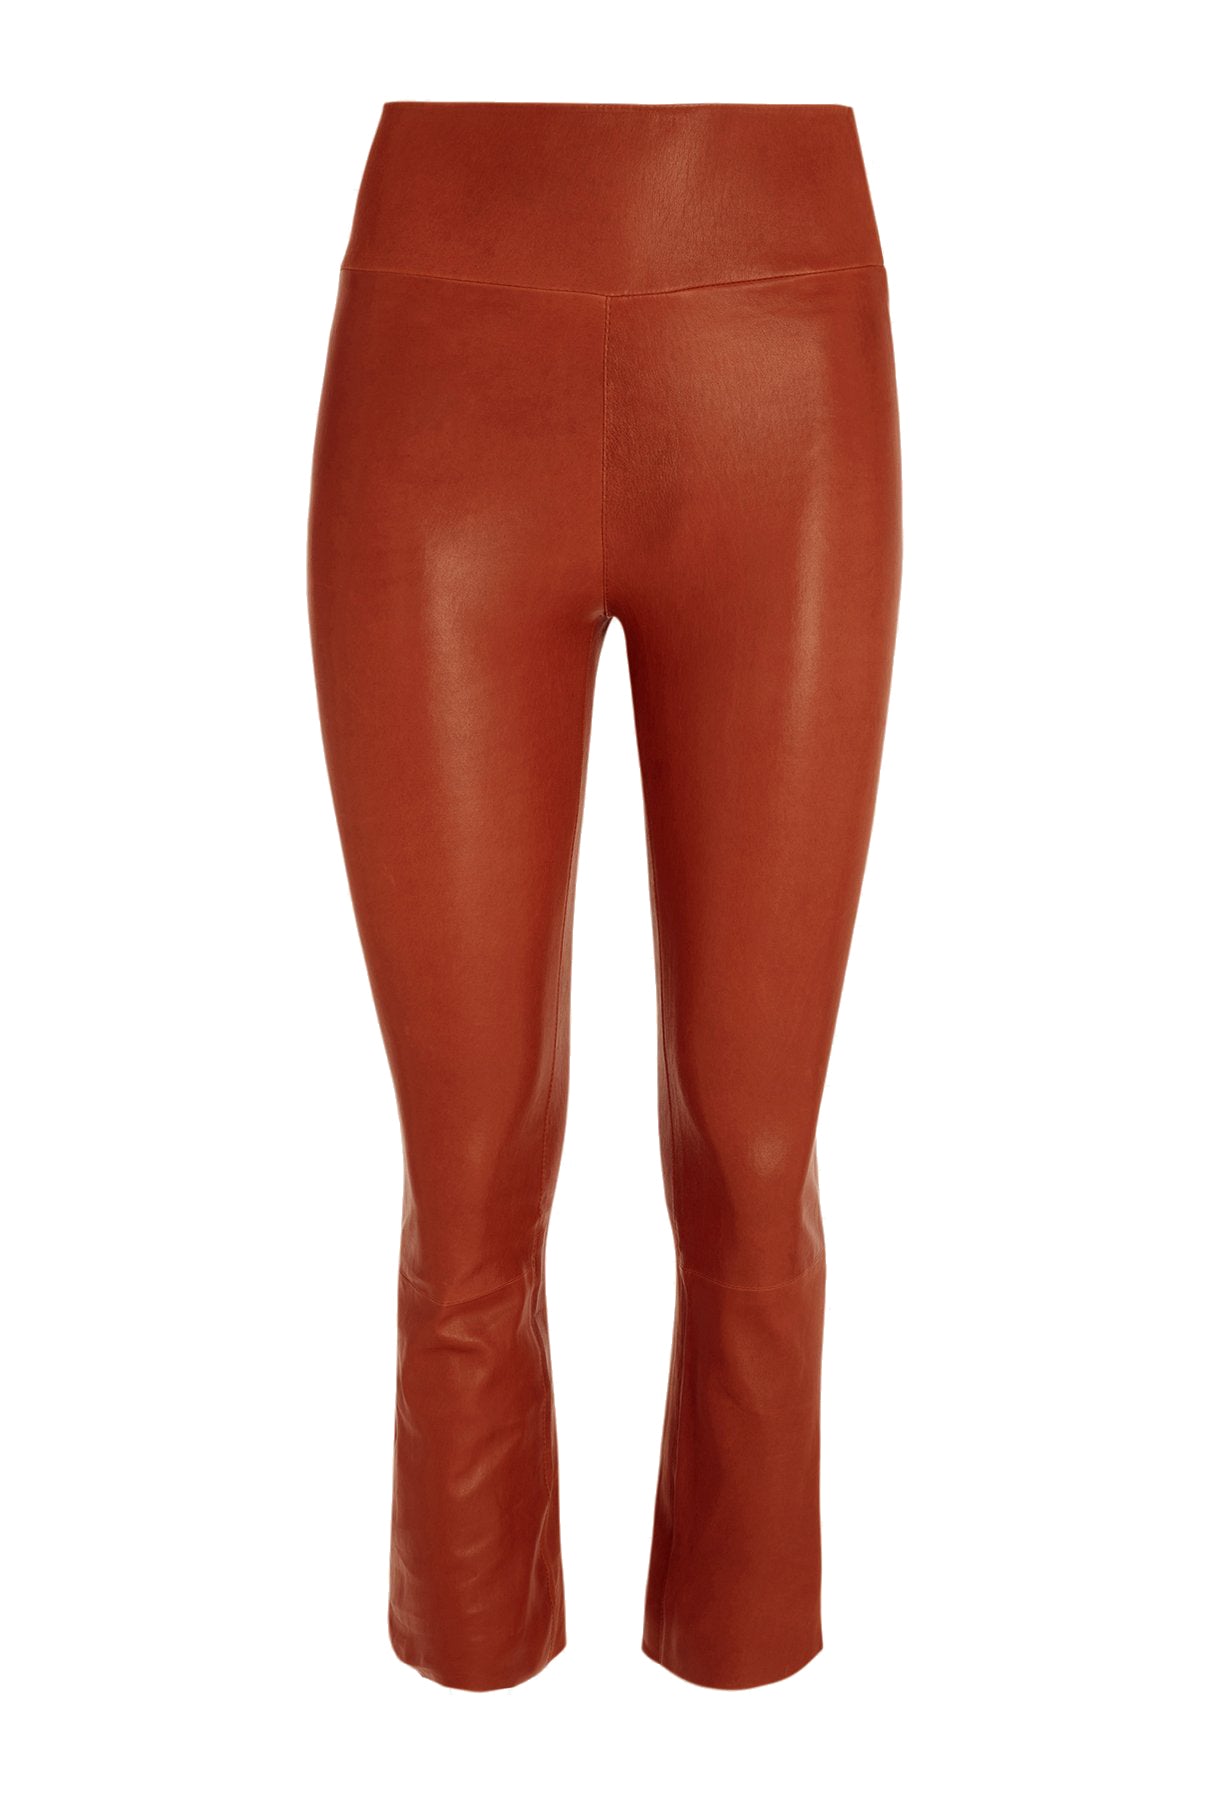 High-rise flared leather pants in brown - Alessandra Rich